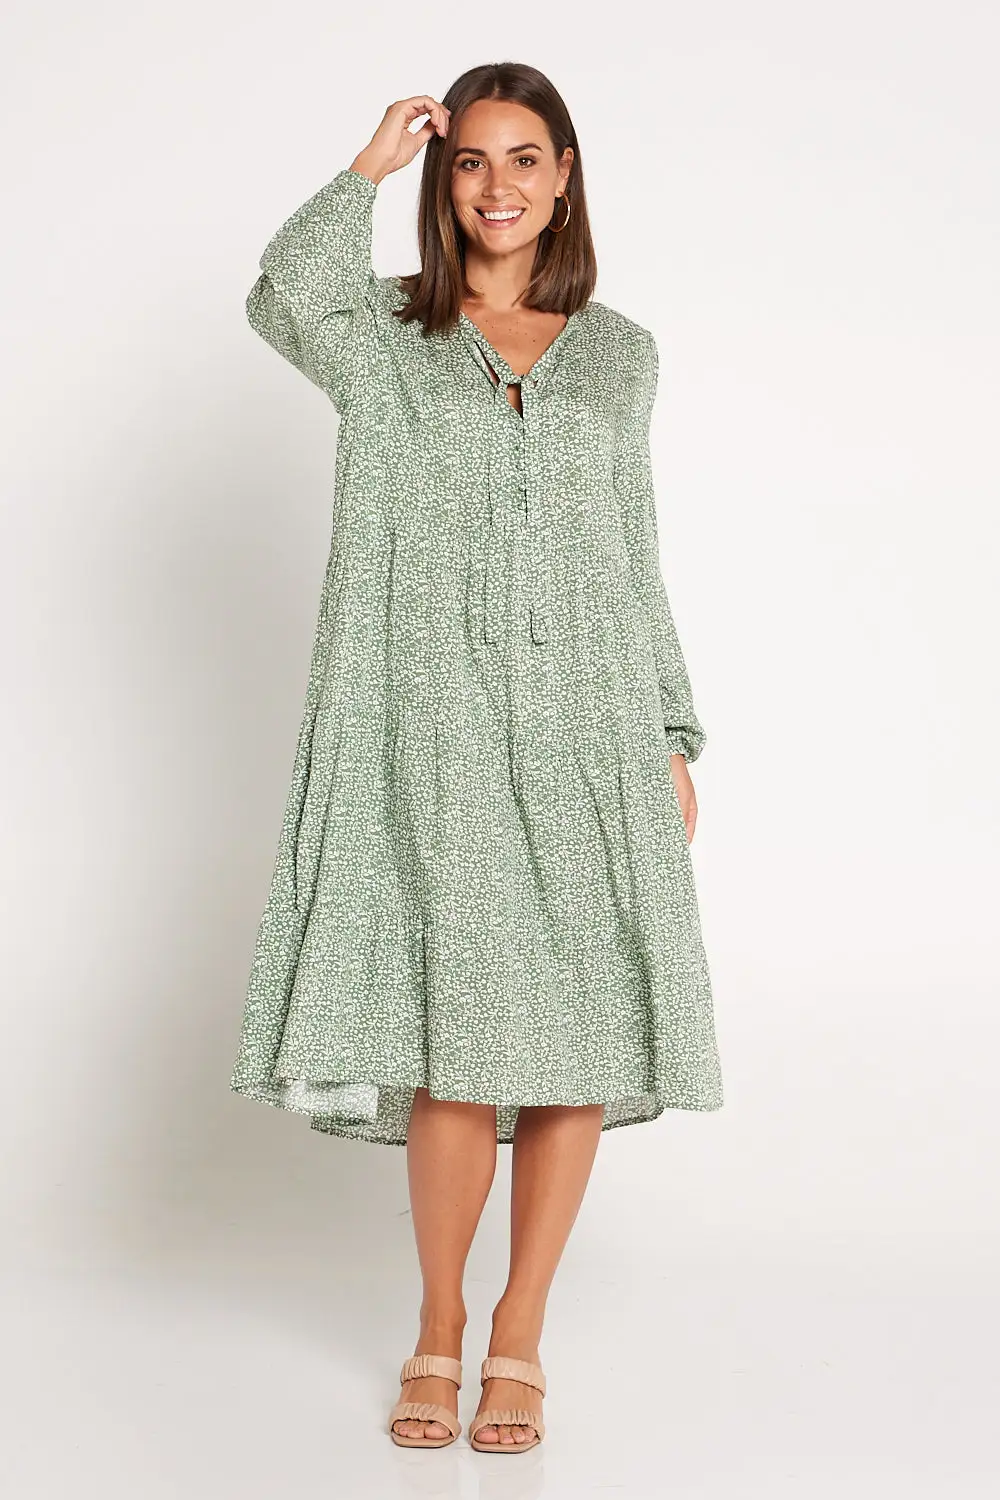 Everly Dress - Sage Ditsy Floral